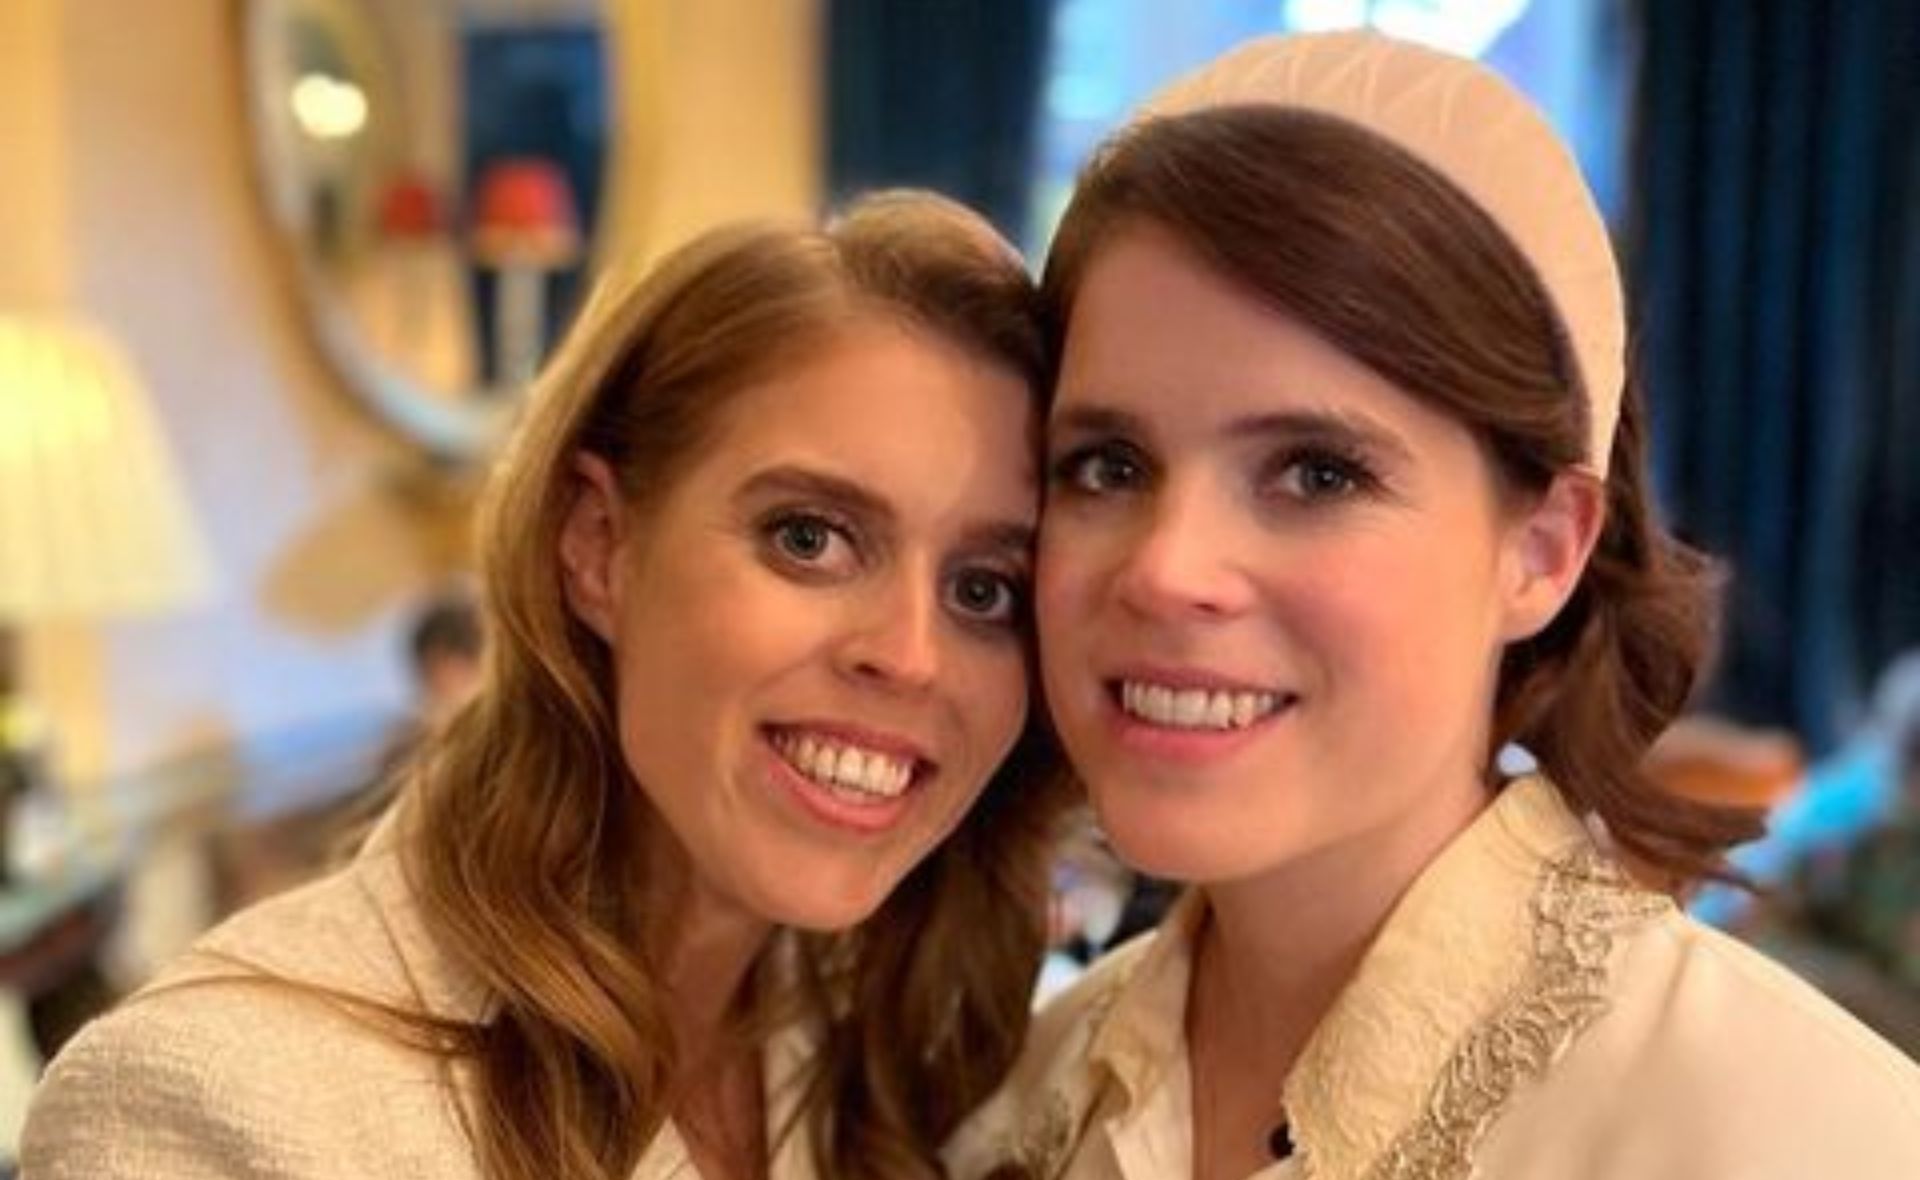 Princess Eugenie debuts never-before-seen photos in special tribute for Beatrice’s birthday